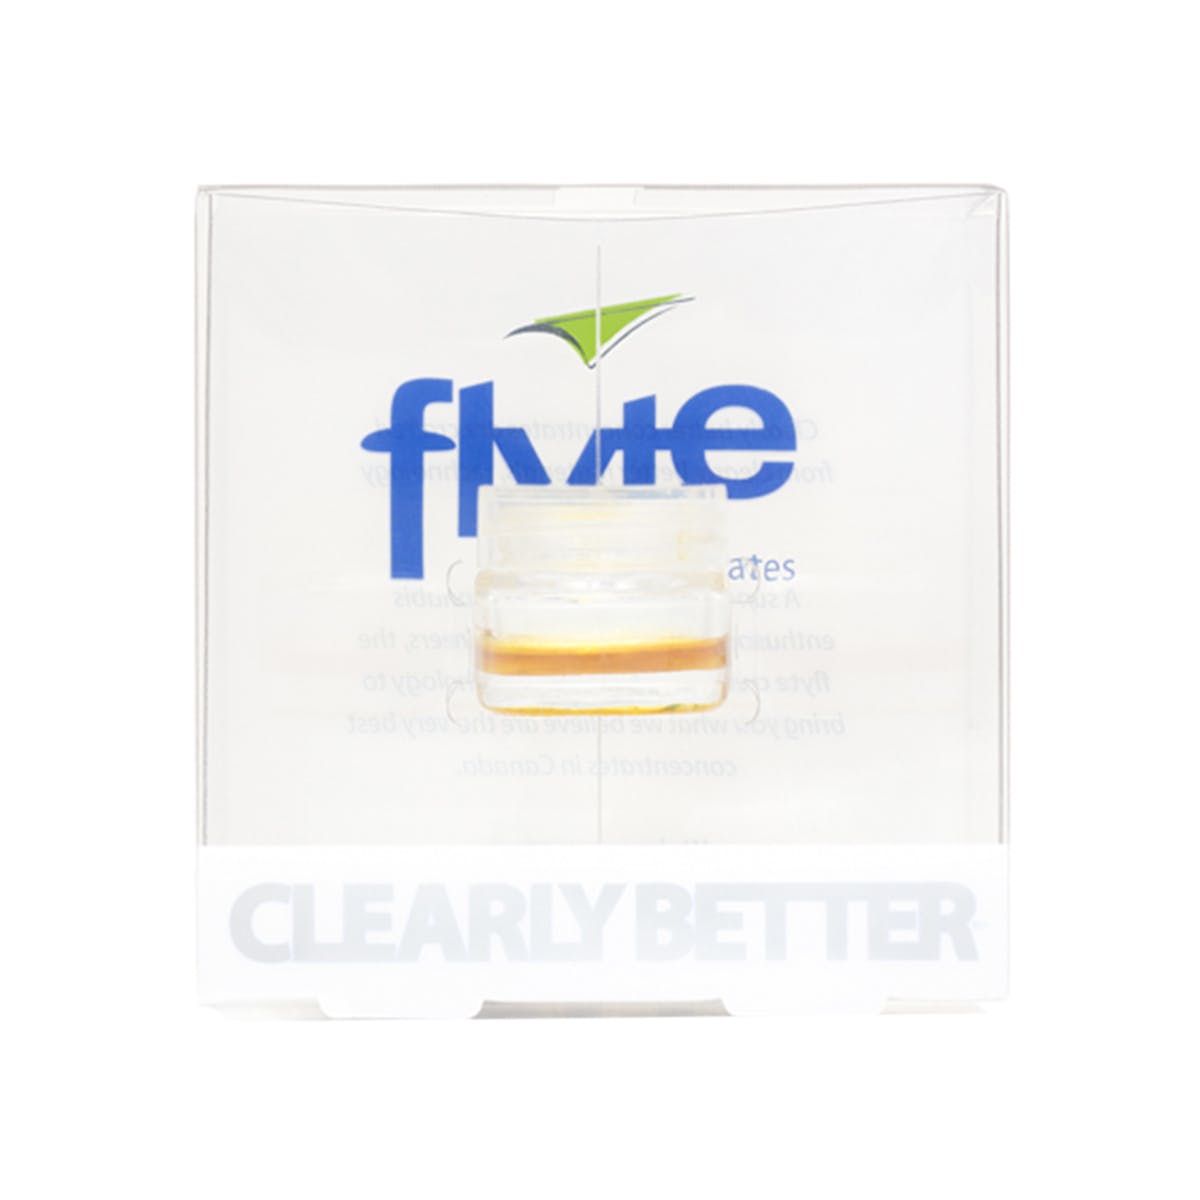 concentrate-flyte-concentrates-raw-flyte-dabs